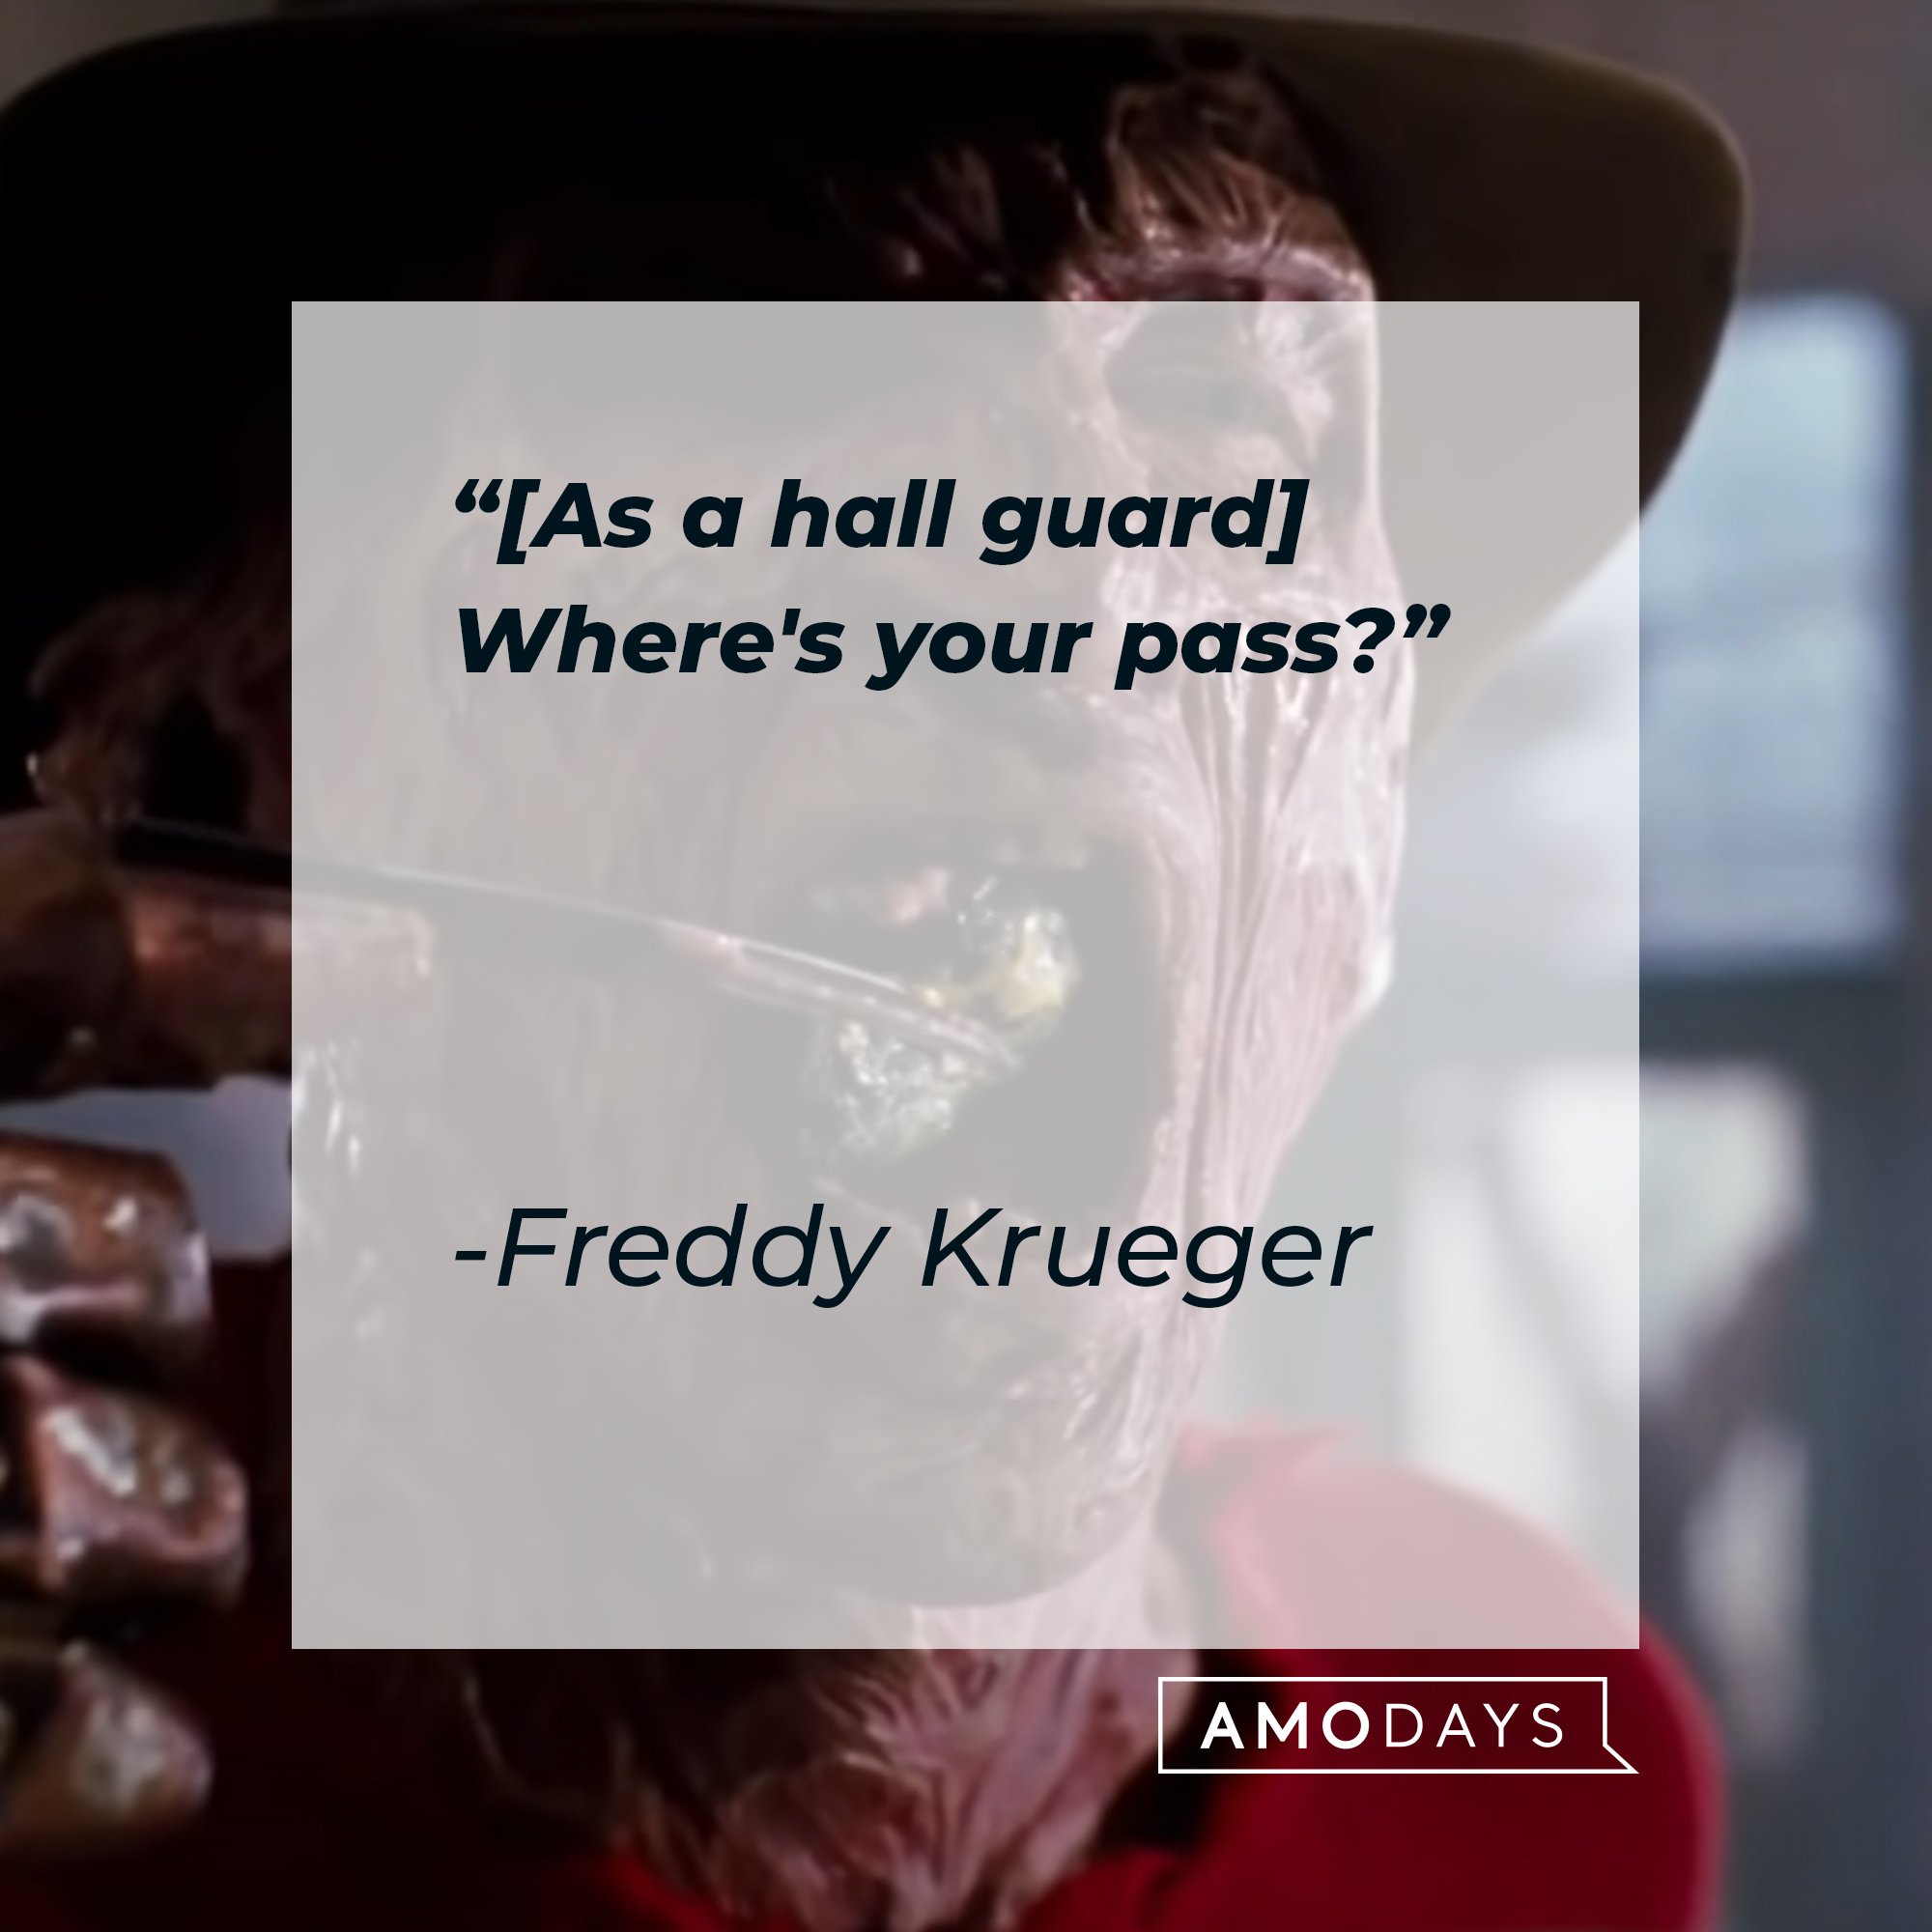 Freddy Krueger’s quote: "[As a hall guard] Where's your pass?"| Image: AmoDays